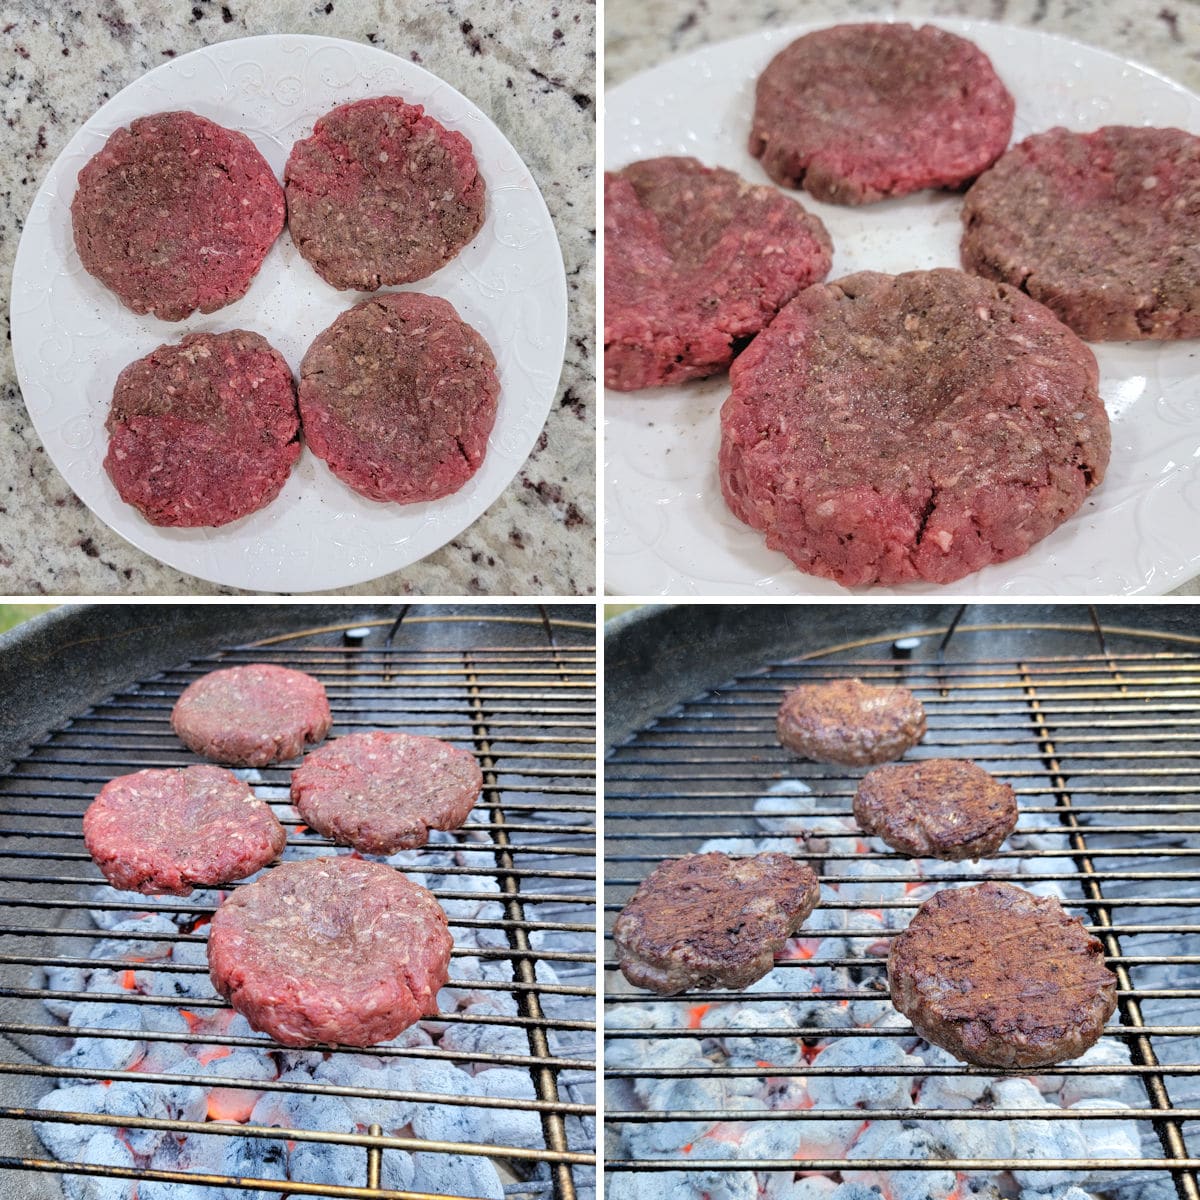 Forming bison burger patties and cooking on the grill.